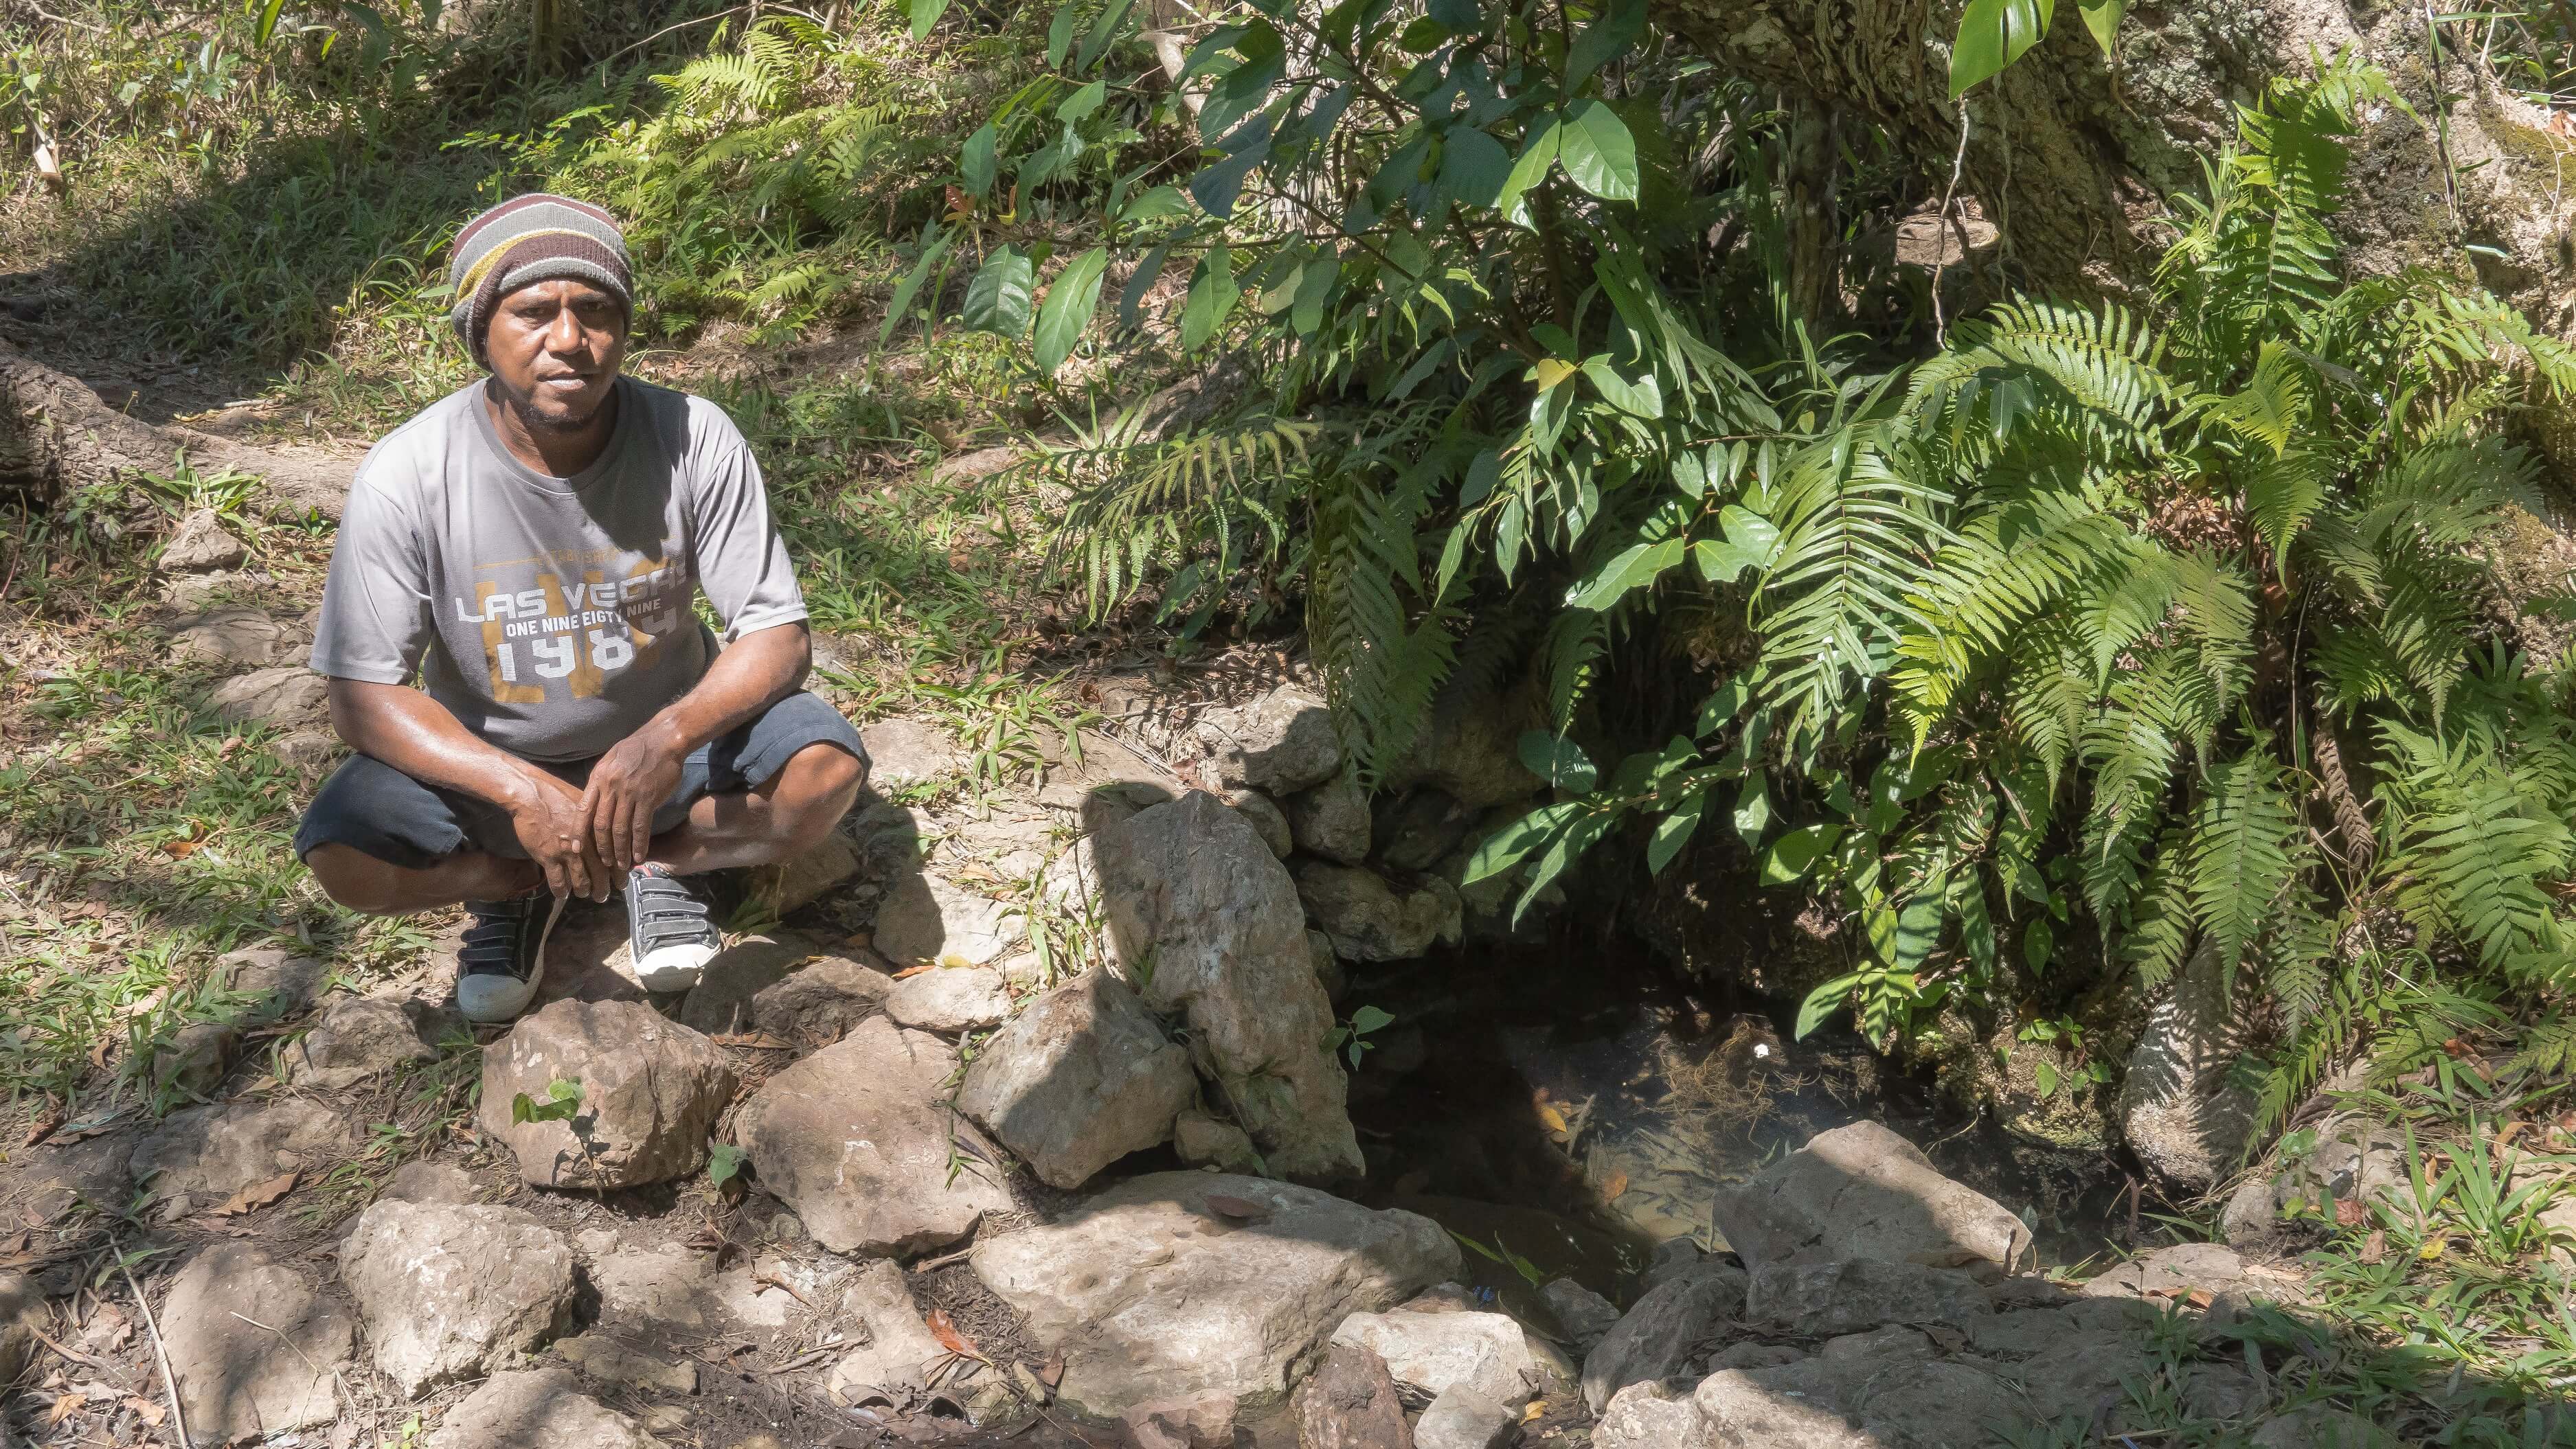 Guide Willybrodus Oematan introducing one of the Oematan triple wellsprings in Taiftob. The Oematans are a Timorese clan traditionally designated as guardians of water sources. This wellspring is believed to have been ritually “planted” by Willy’s grandfather. Photo by Andra Fembriarto